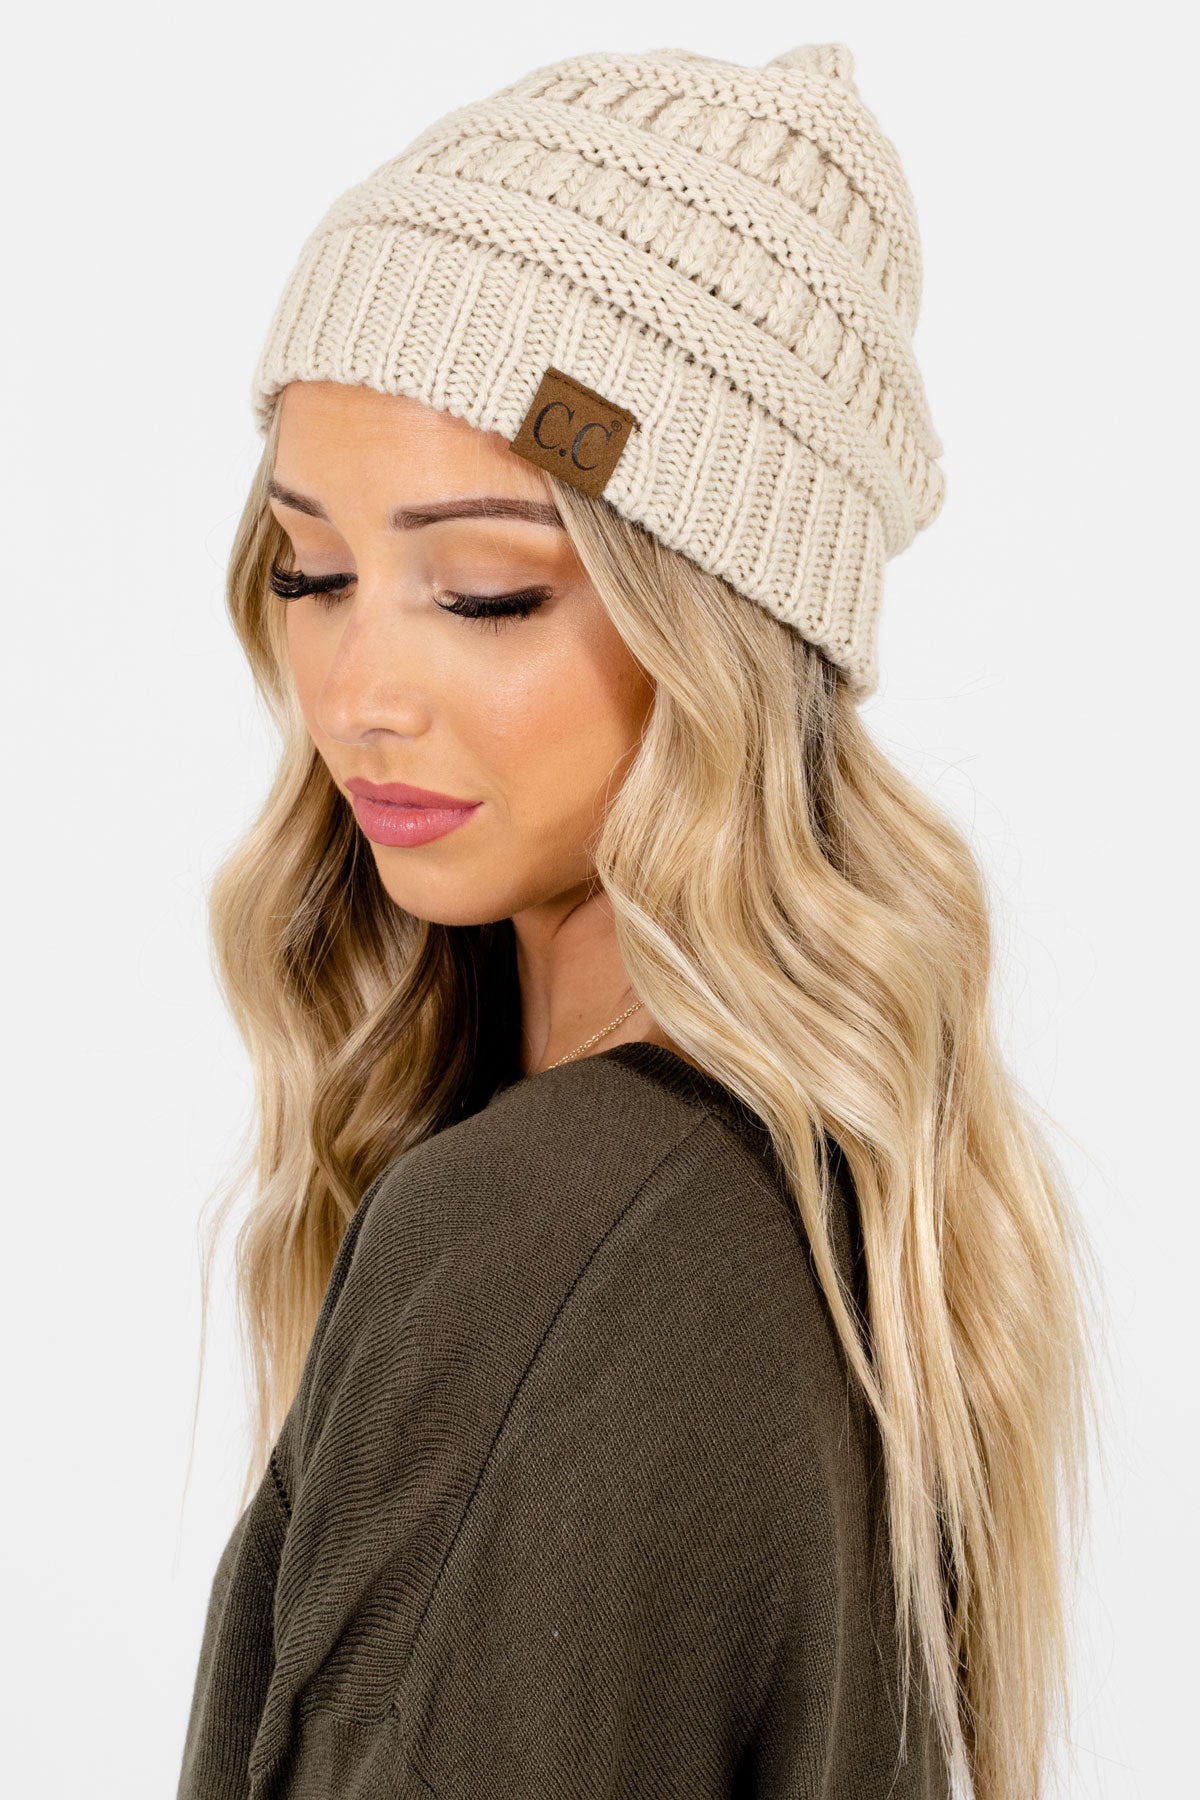 Cream High-Quality Knit Boutique Beanies for Women